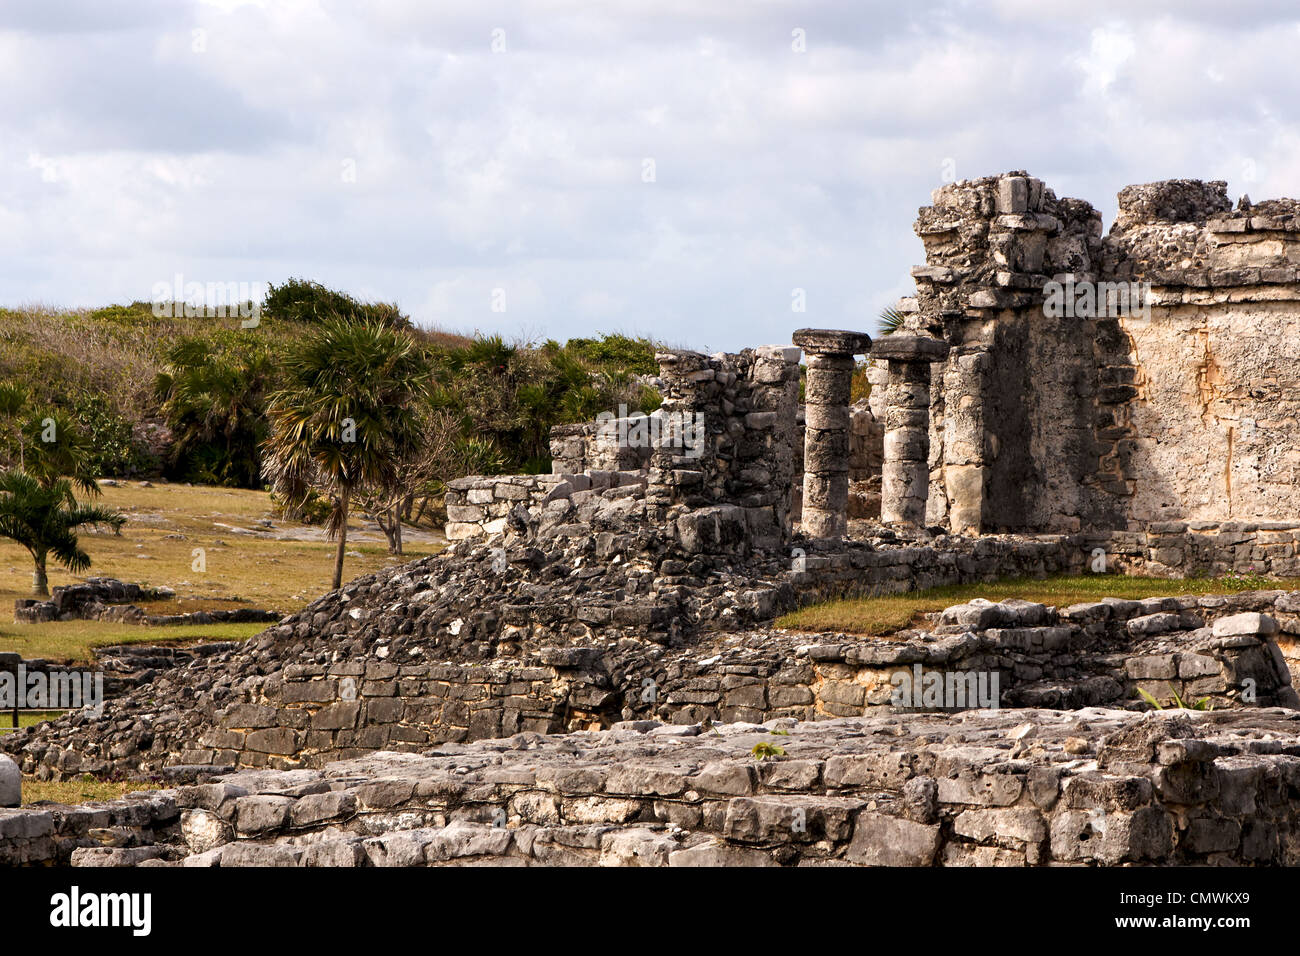 Crumbling ruins at the Mayan archaeological zone at Tulum, Quintana Roo, Mexico. Stock Photo